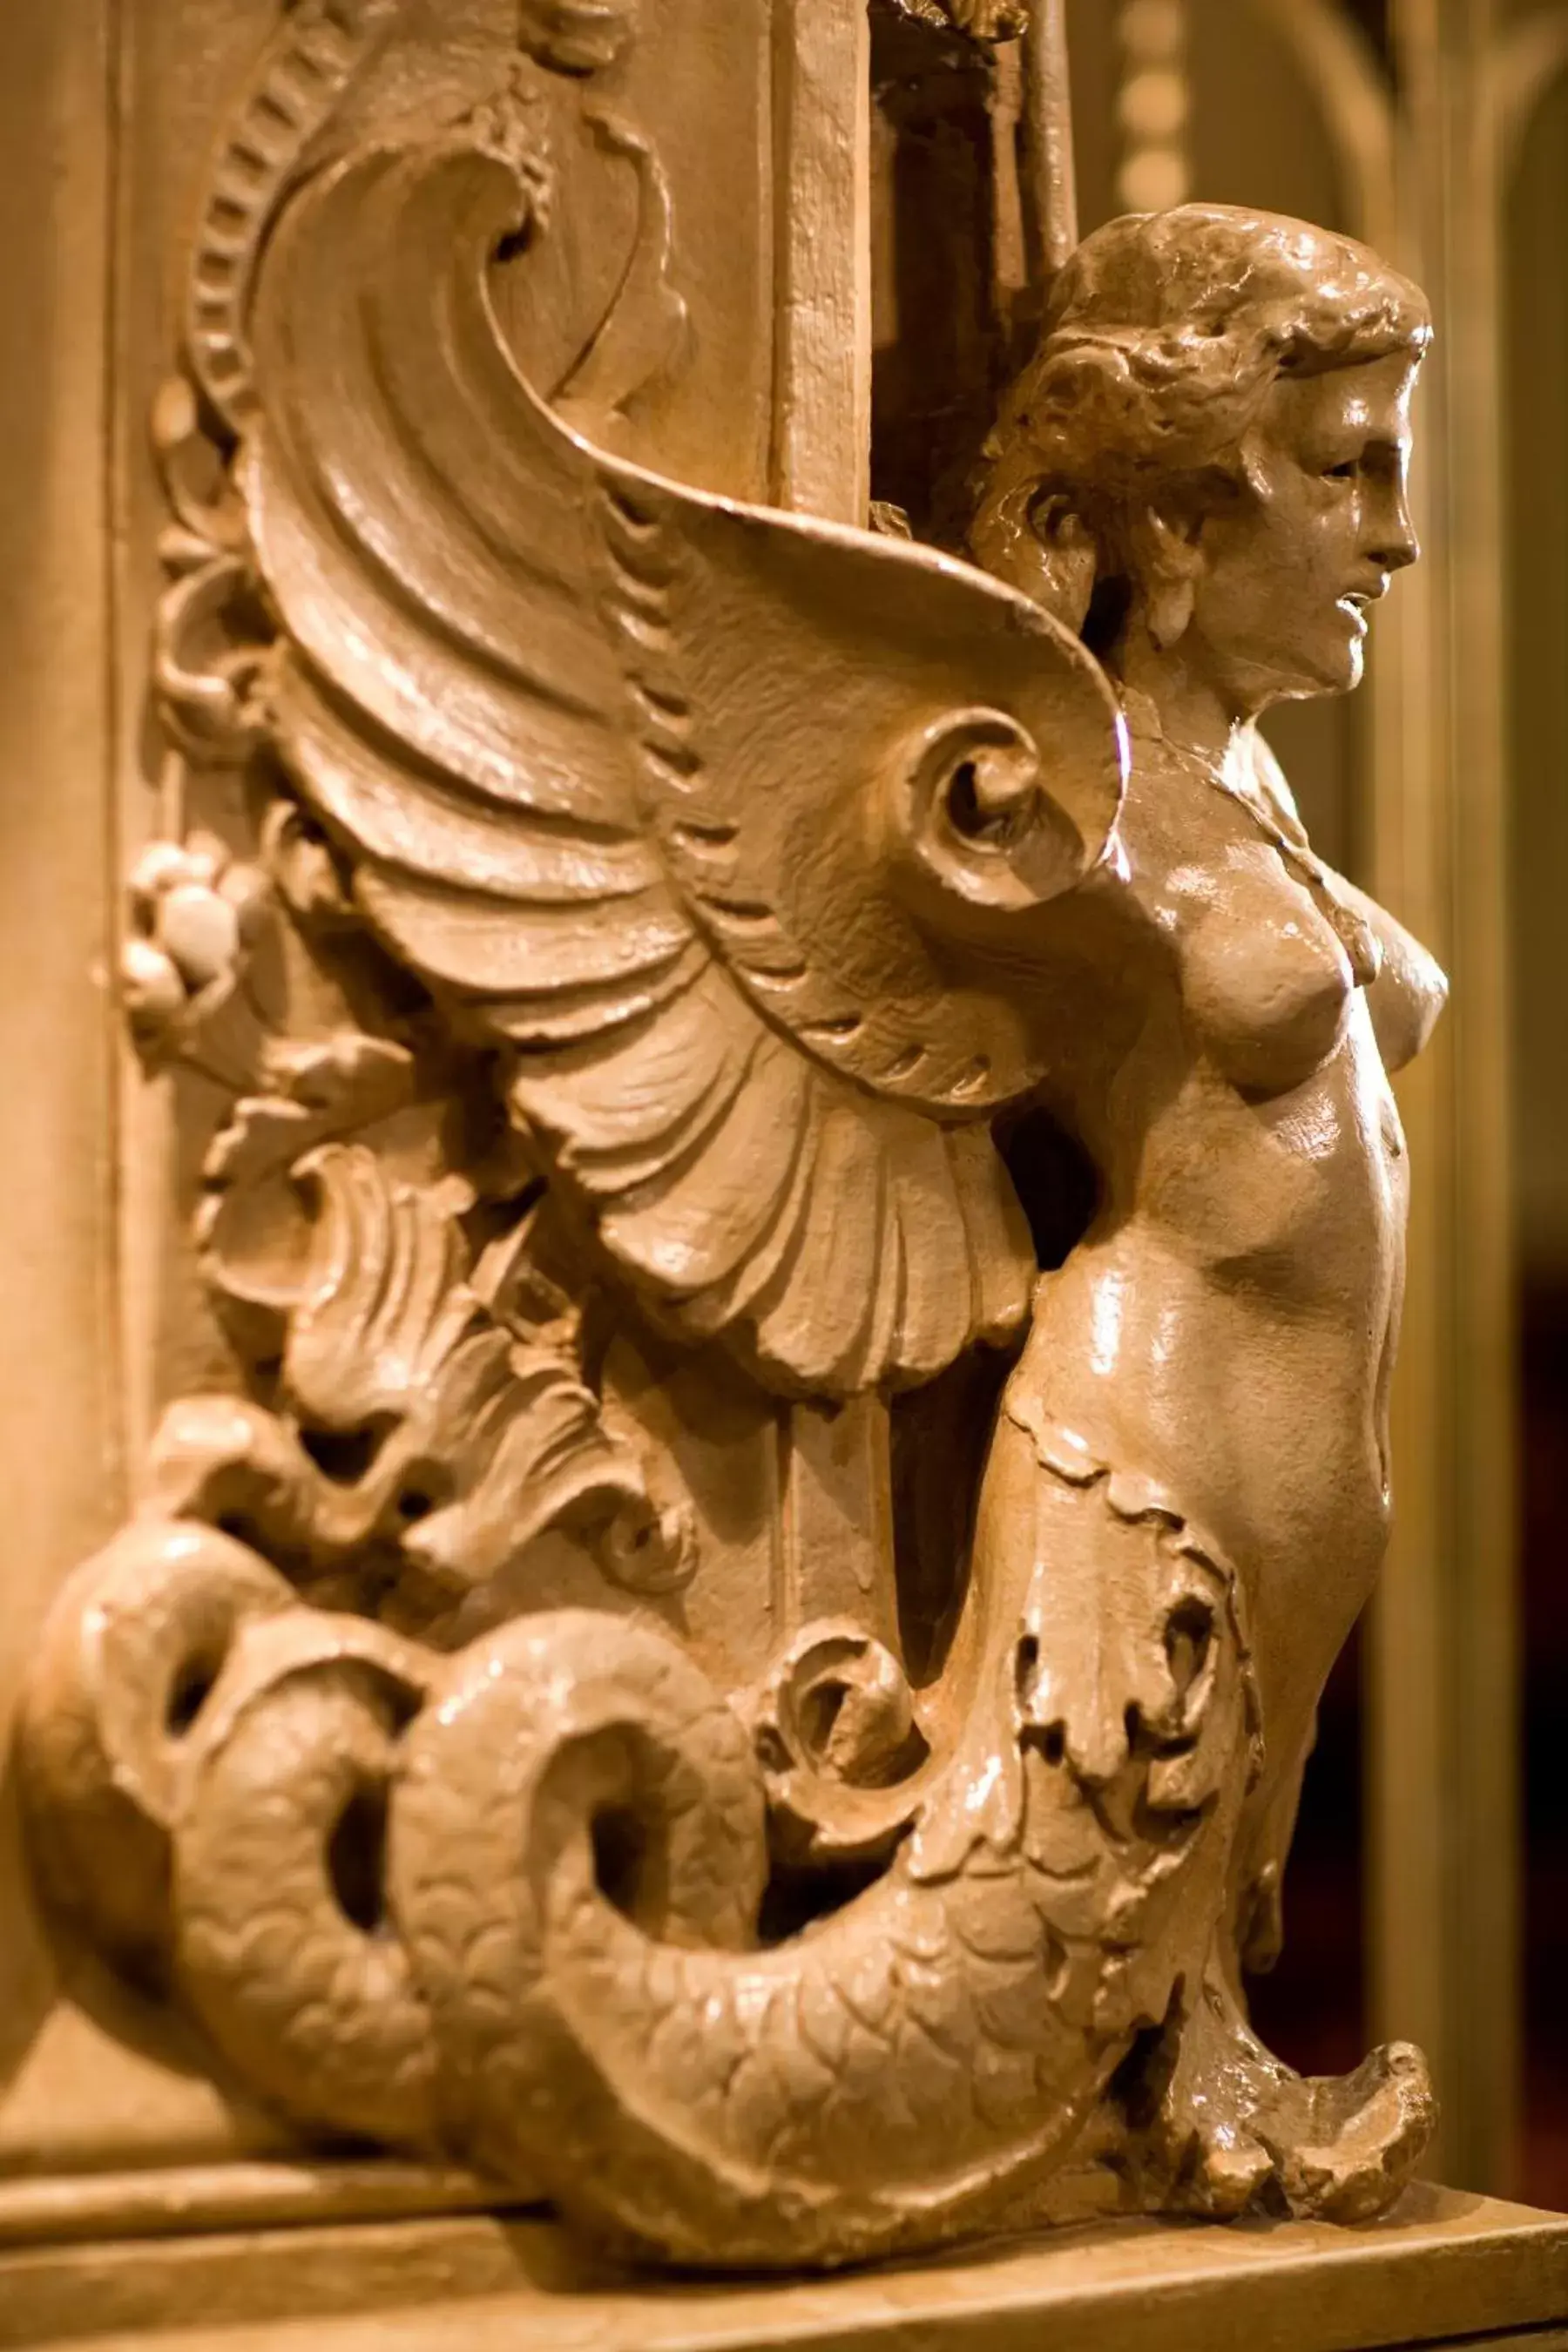 Decorative detail in The Biltmore Los Angeles